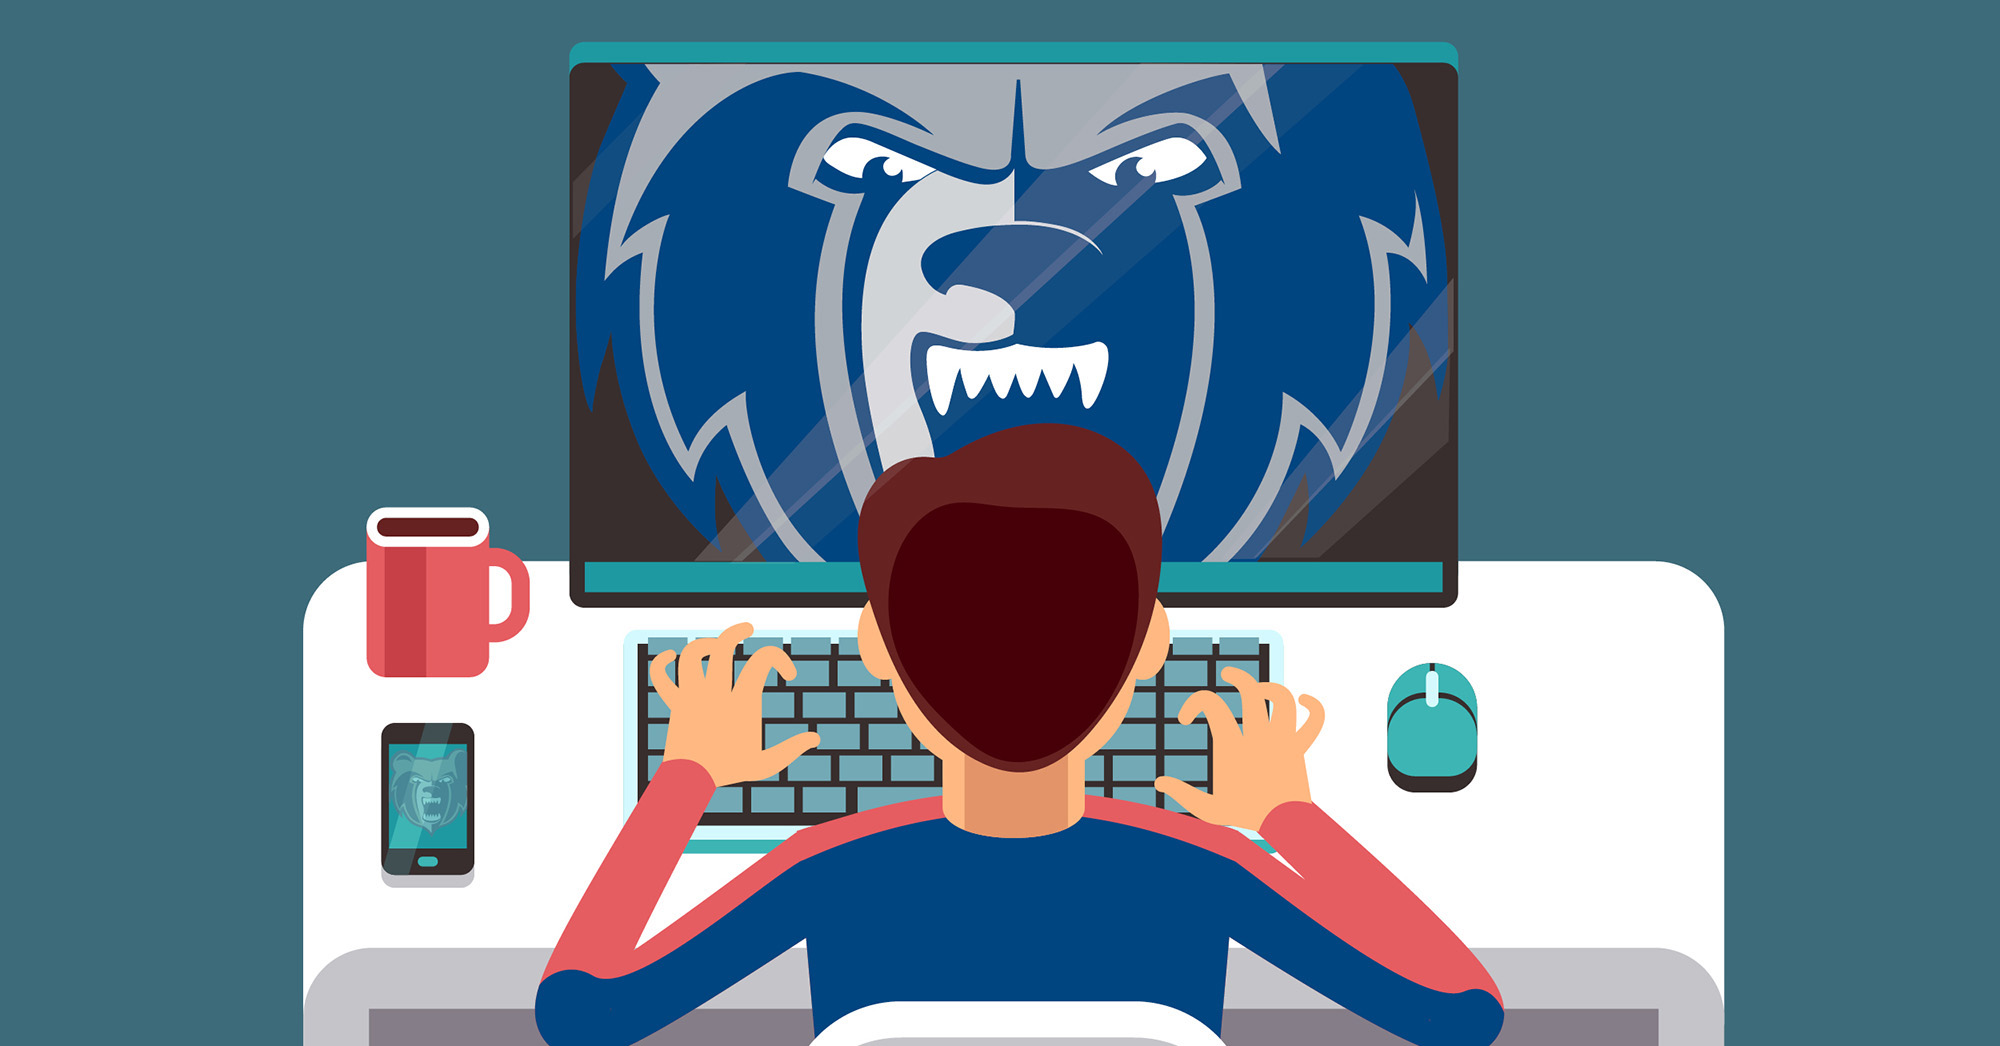 Illustration of a student typing on a computer with the Bruin head logo on the screen.